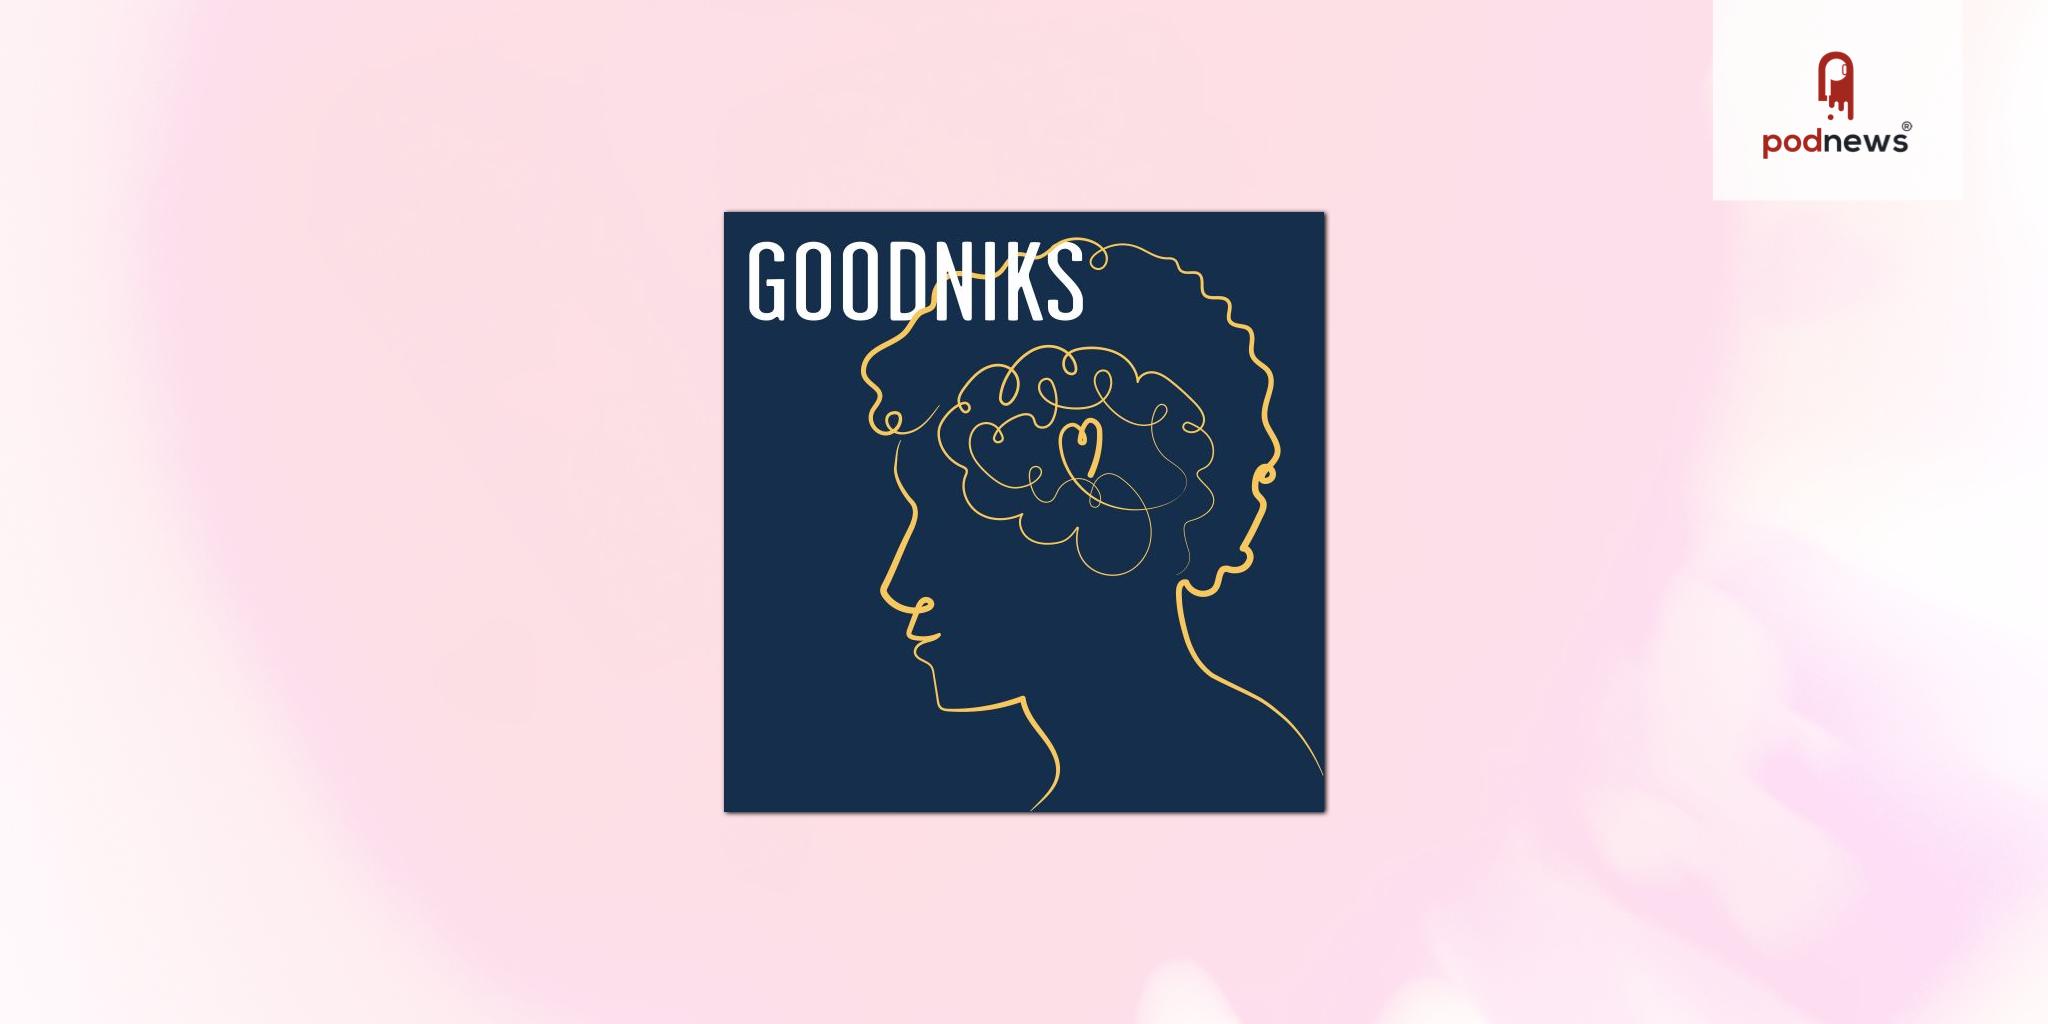 Social Innovator Jeff Leitner and Human Rights Activist Annalisa Enrile Launch Goodniks Podcast